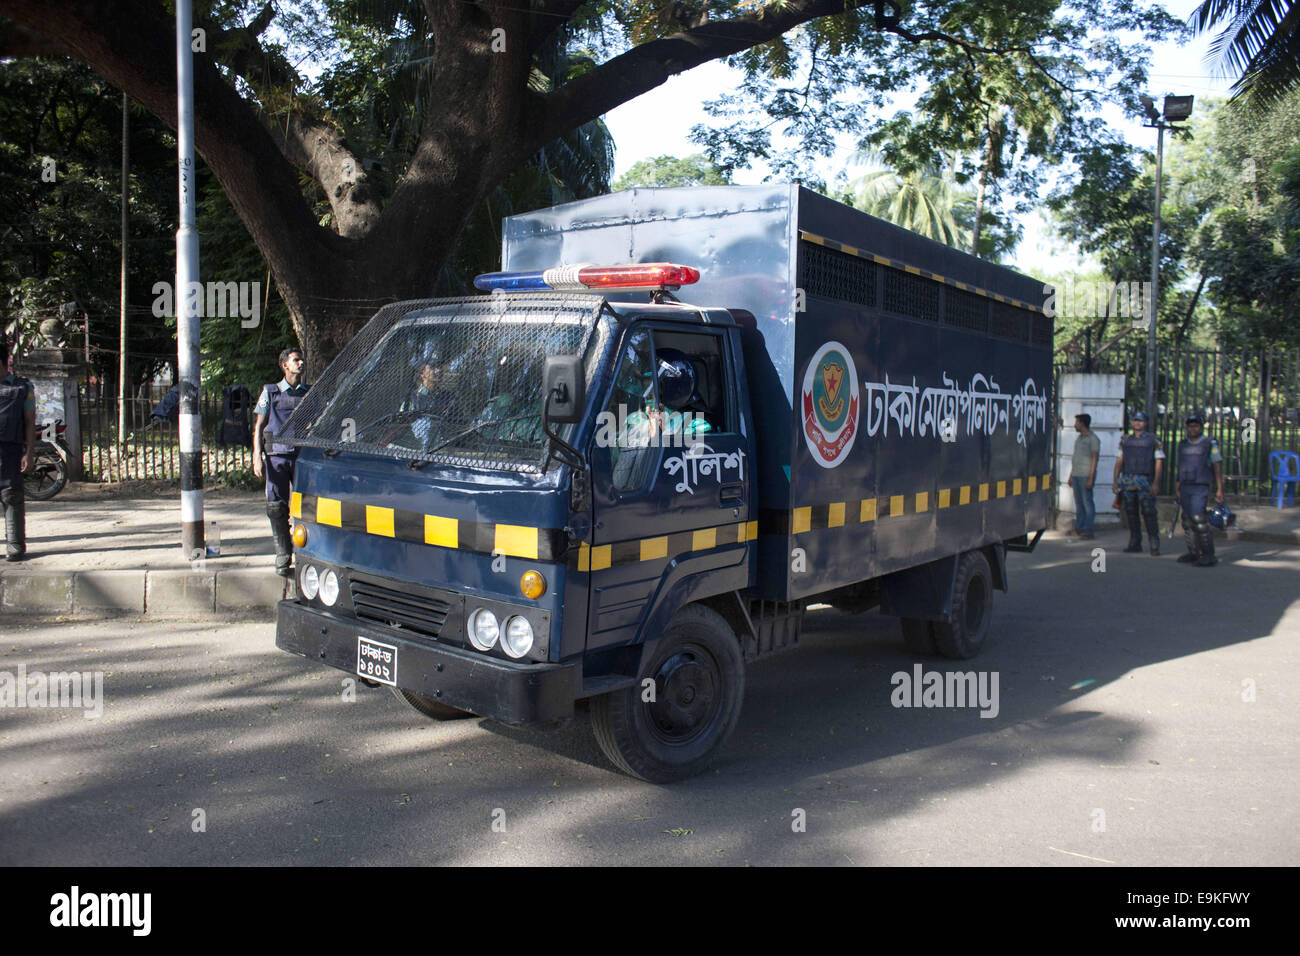 Dhaka, Bangladesh. 29th Oct, 2014. The prison van holding Jamaat-e-Islami chief Motiur Rahman Nizami is driven into prison this evening. The special tribunal in Bangladesh on Wednesday sentenced the leader of the country's largest Islamist party to death for his role in the Bangladesh liberation war against Pakistan in 1971. Dhaka, Bangladesh Credit:  Suvra Kanti Das/ZUMA Wire/ZUMAPRESS.com/Alamy Live News Stock Photo